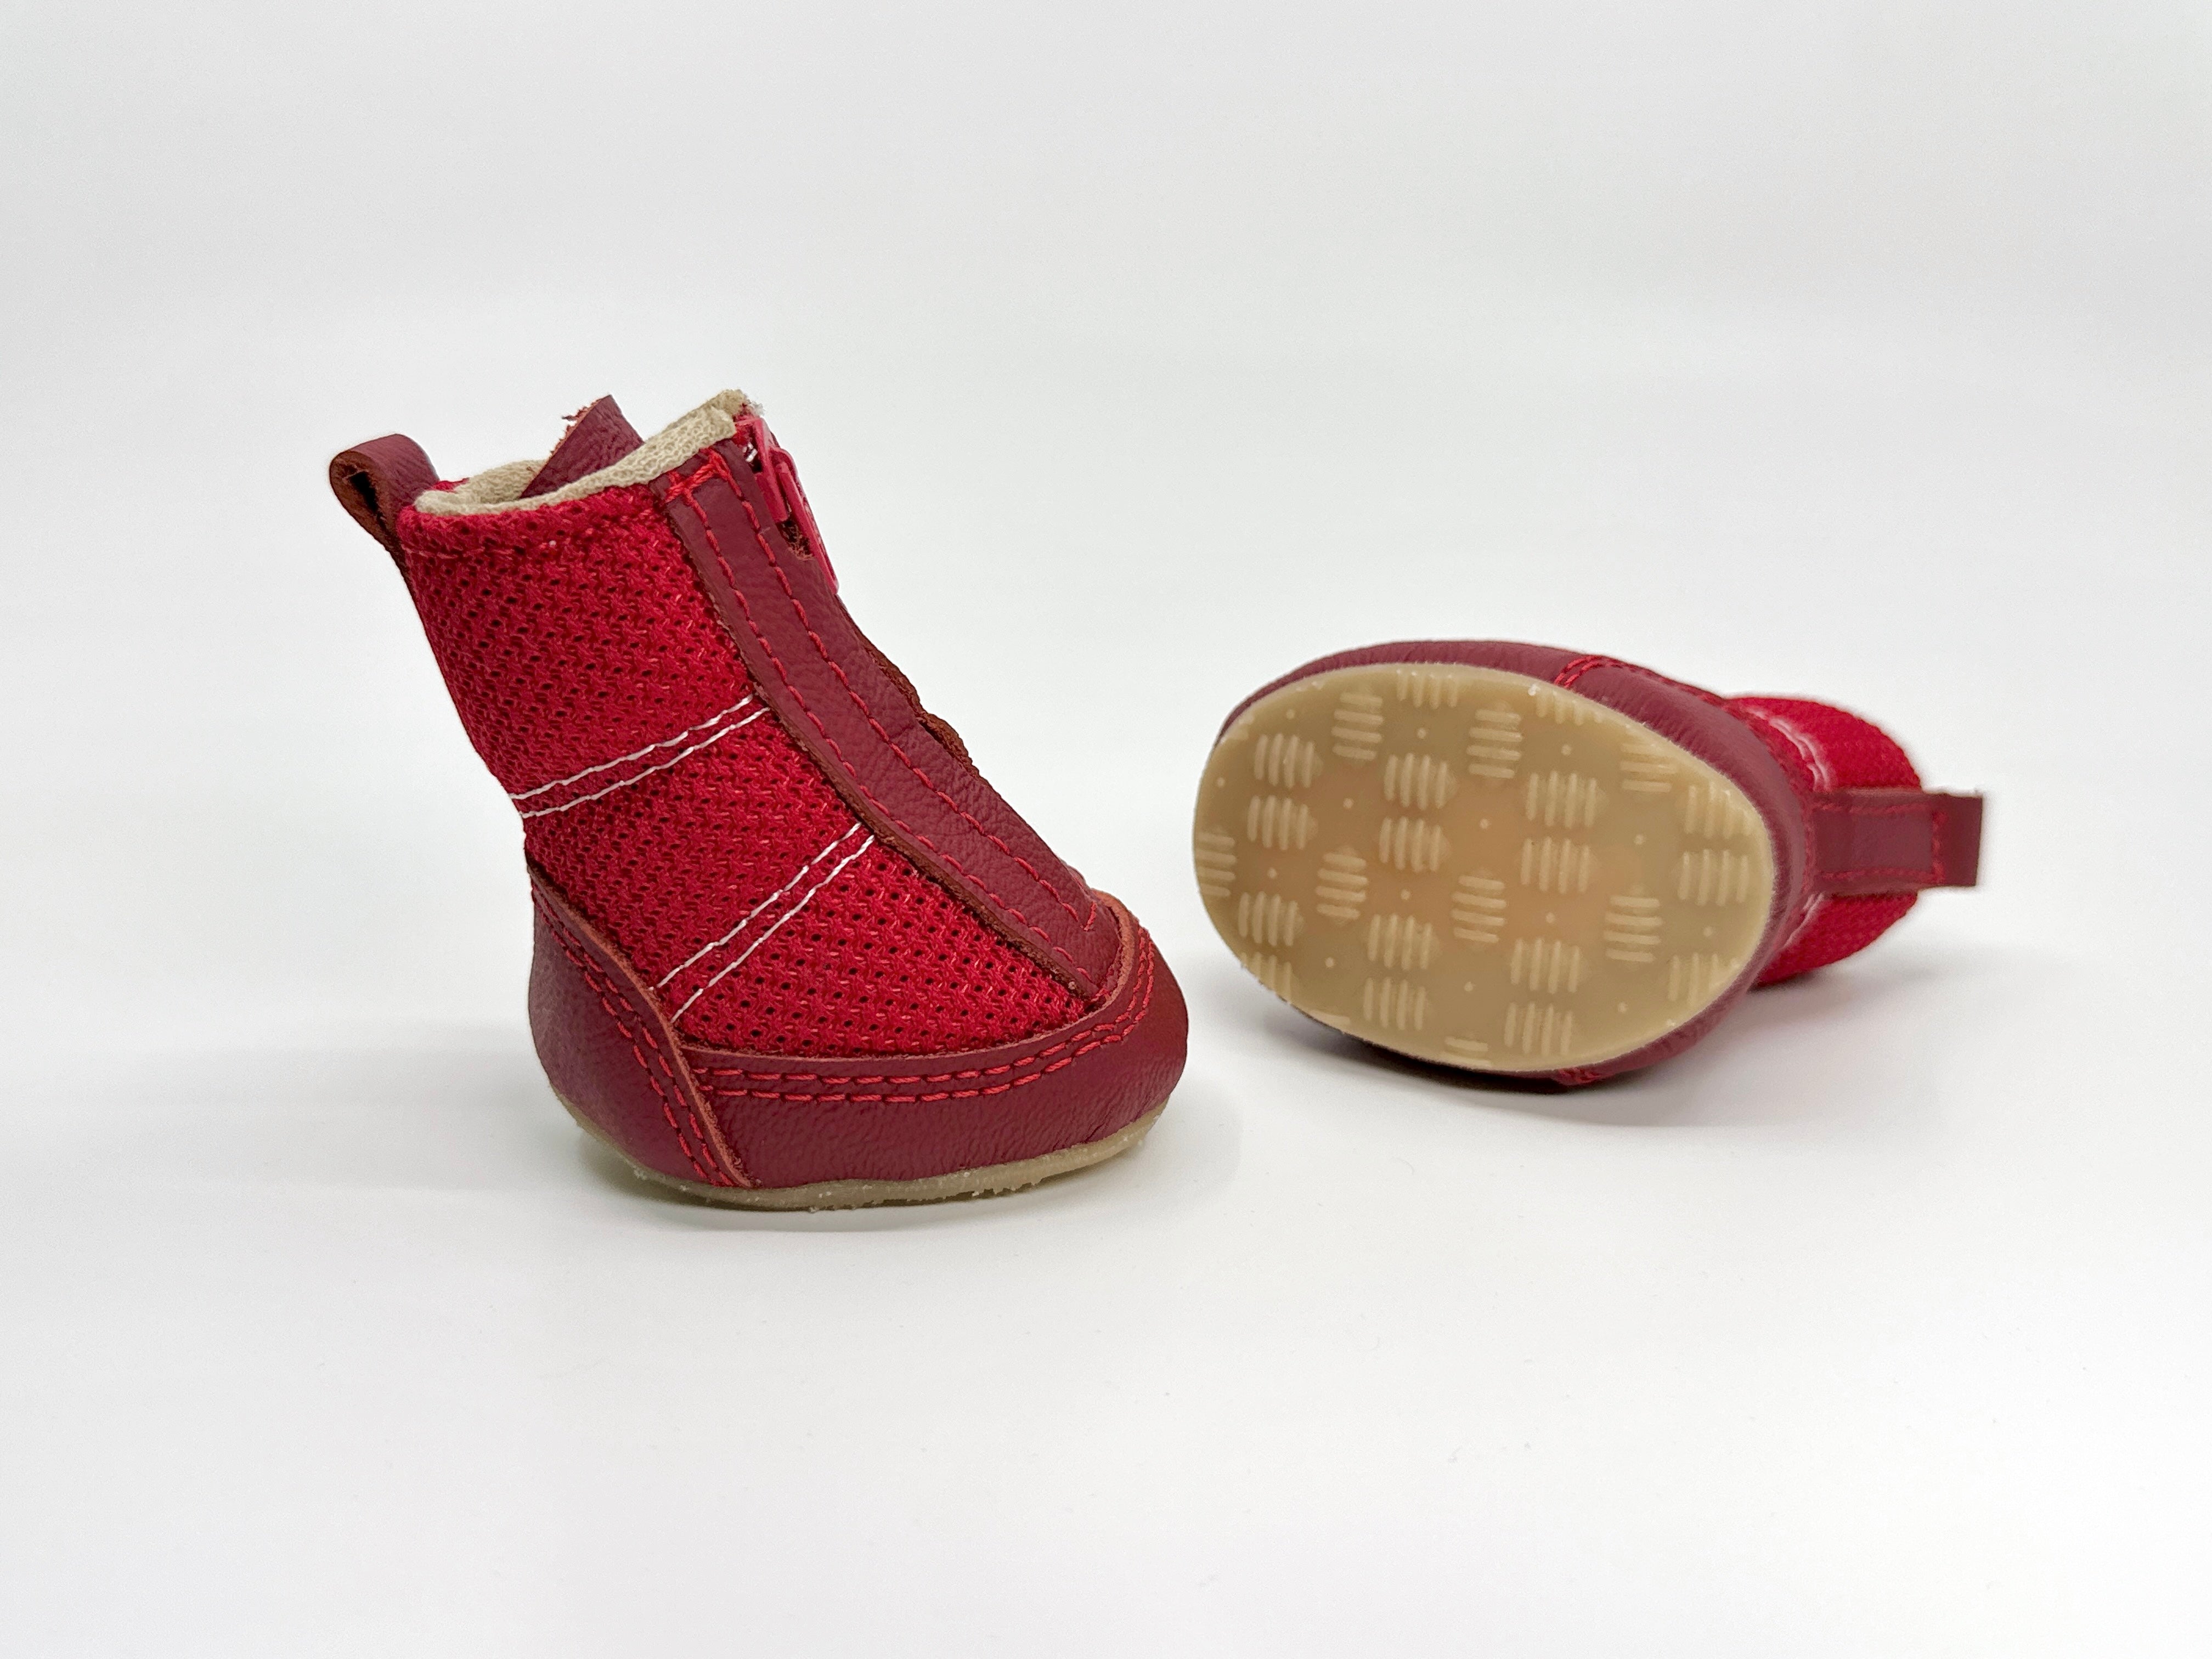 LEON Fiery Red Dog Boots